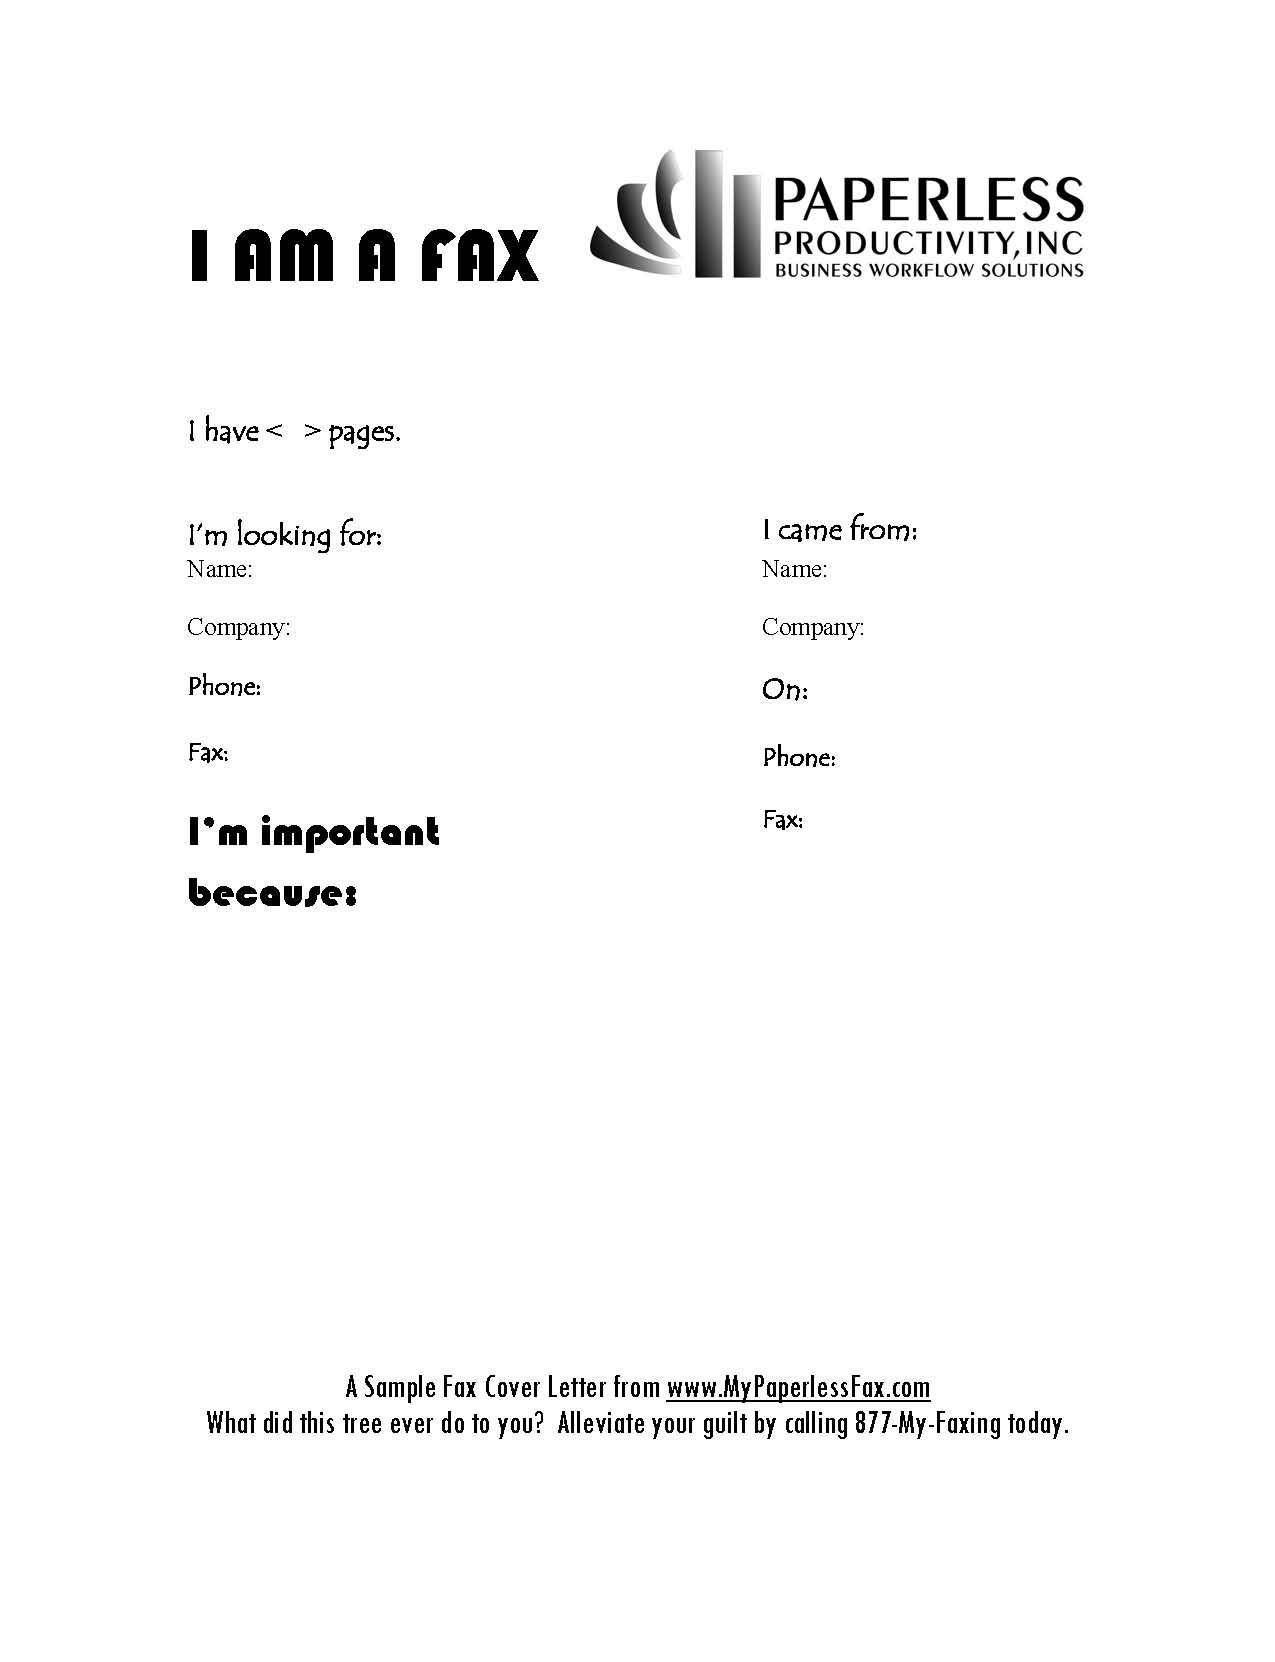 Free Fax Cover Letter Template Forms